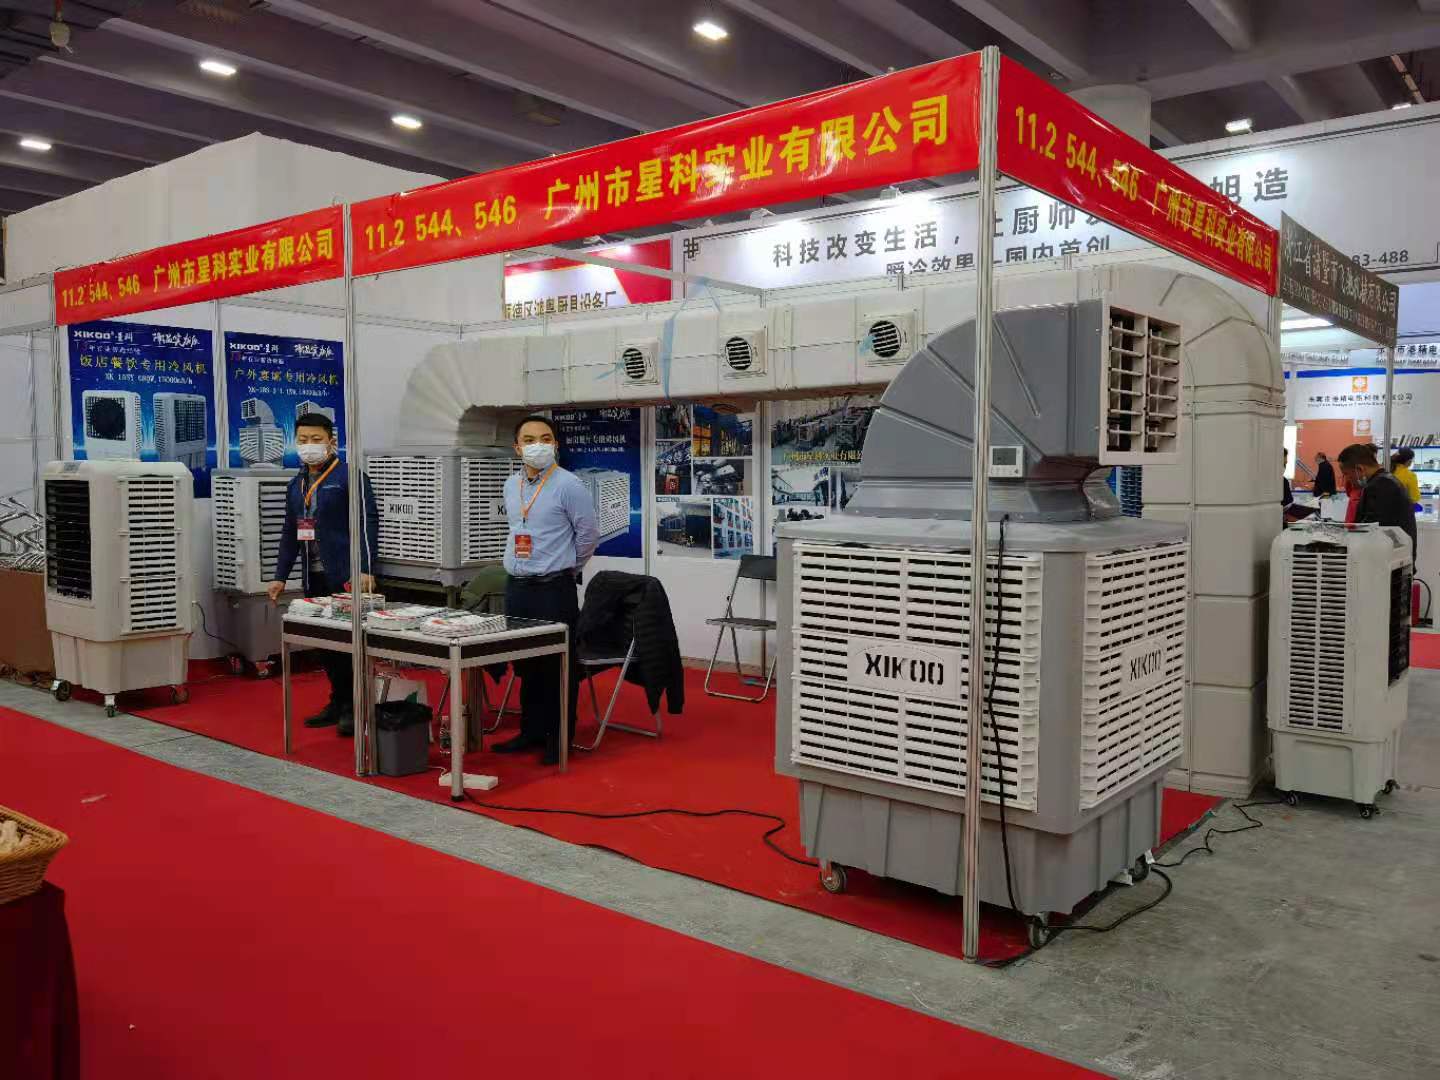 XIKOO attended the 27th Guangzhou Hotel Equipment and Supply Exhibition